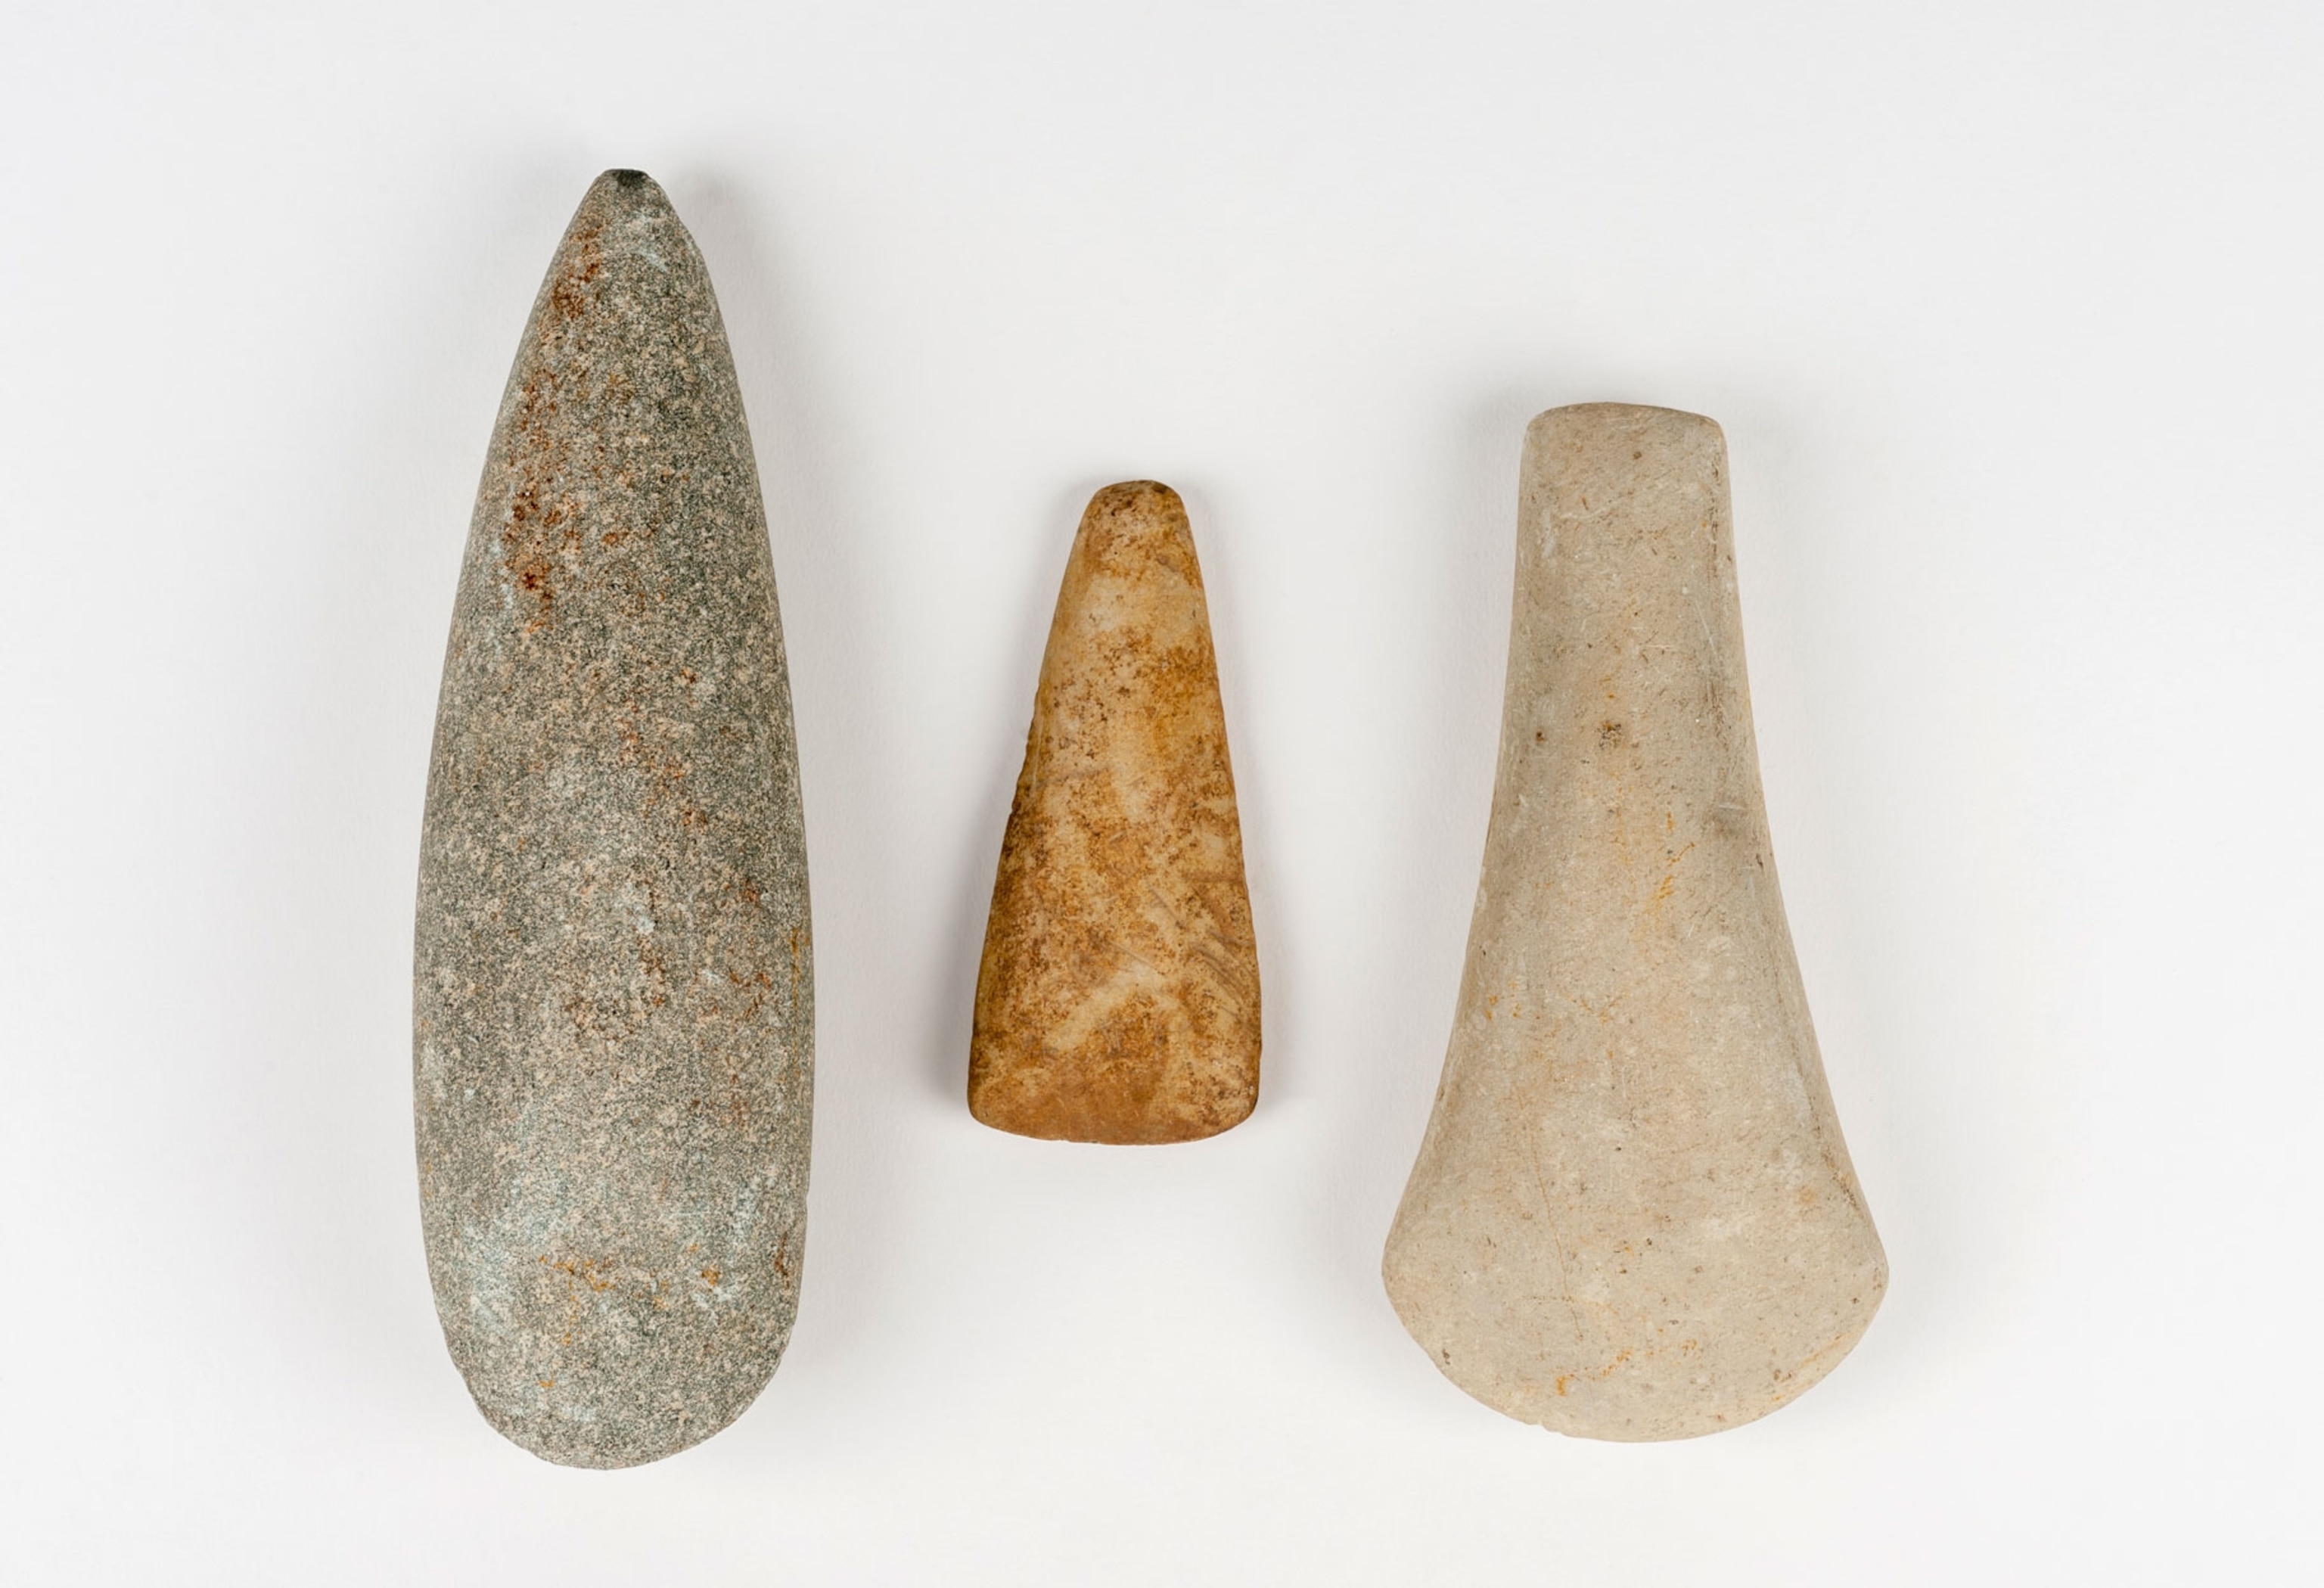 Three smooth pointed stones